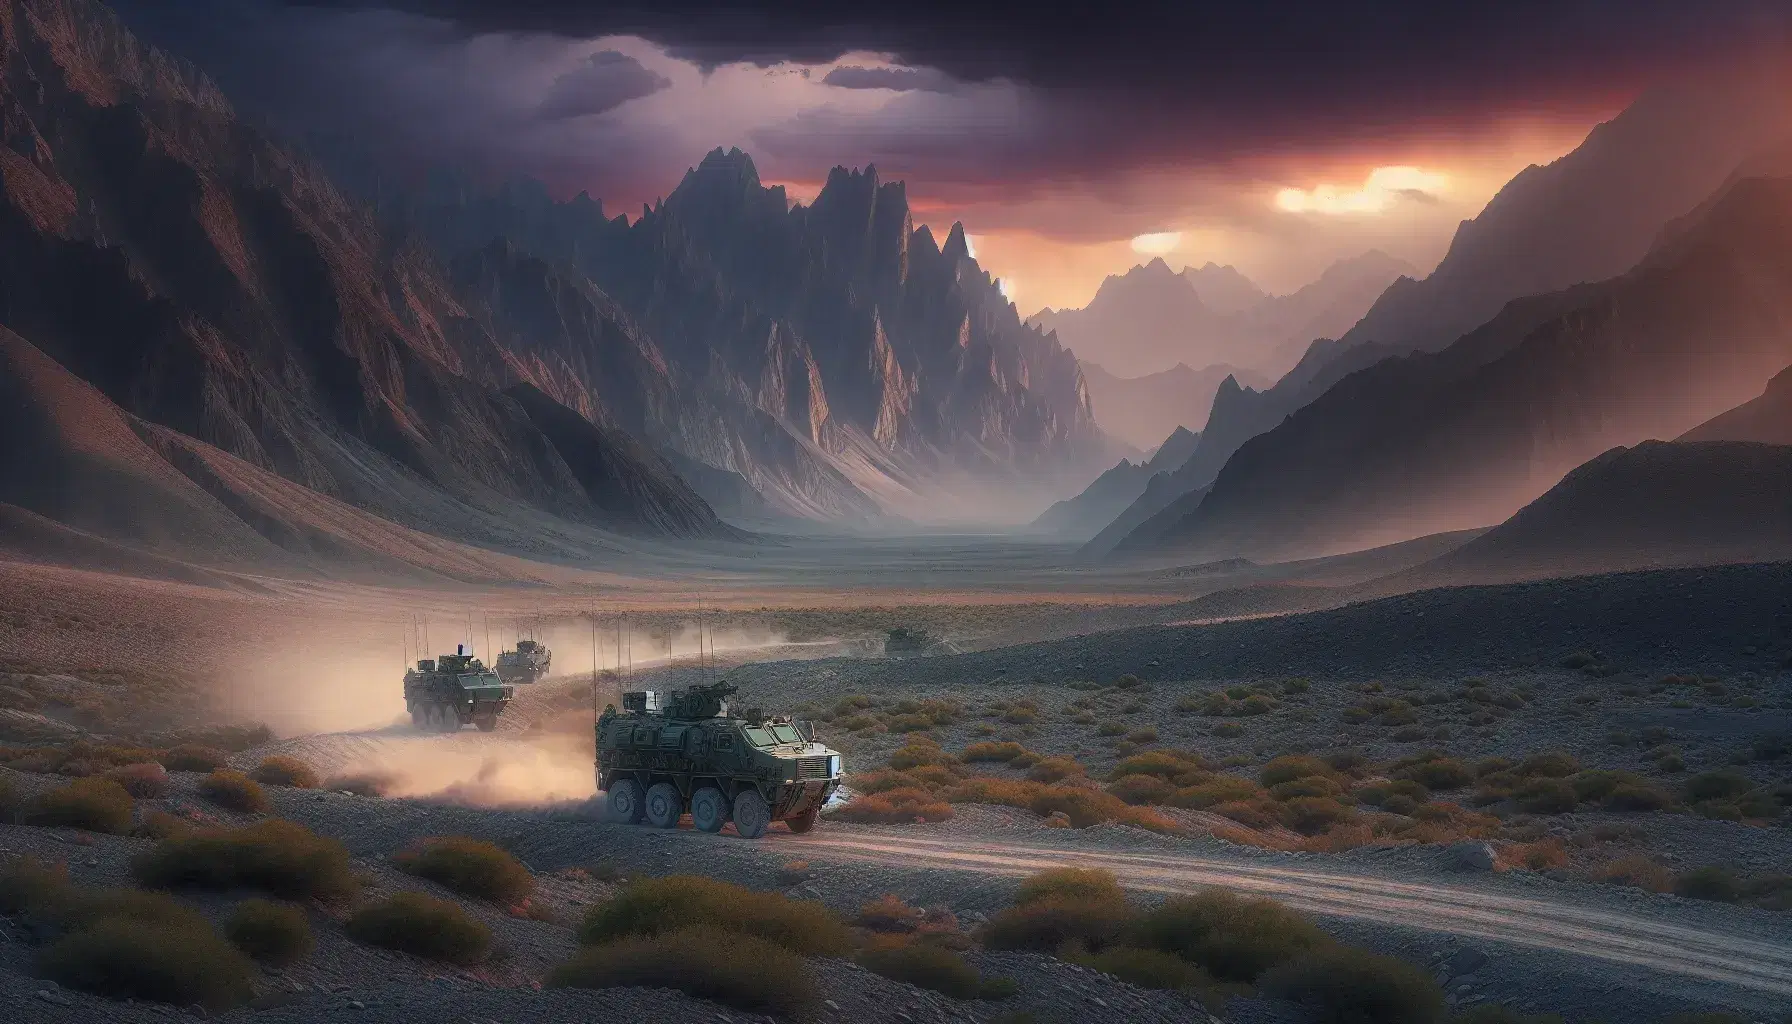 Sunset over a mountainous terrain with a convoy of three military armored vehicles driving on a dusty road, kicking up a haze of dust.